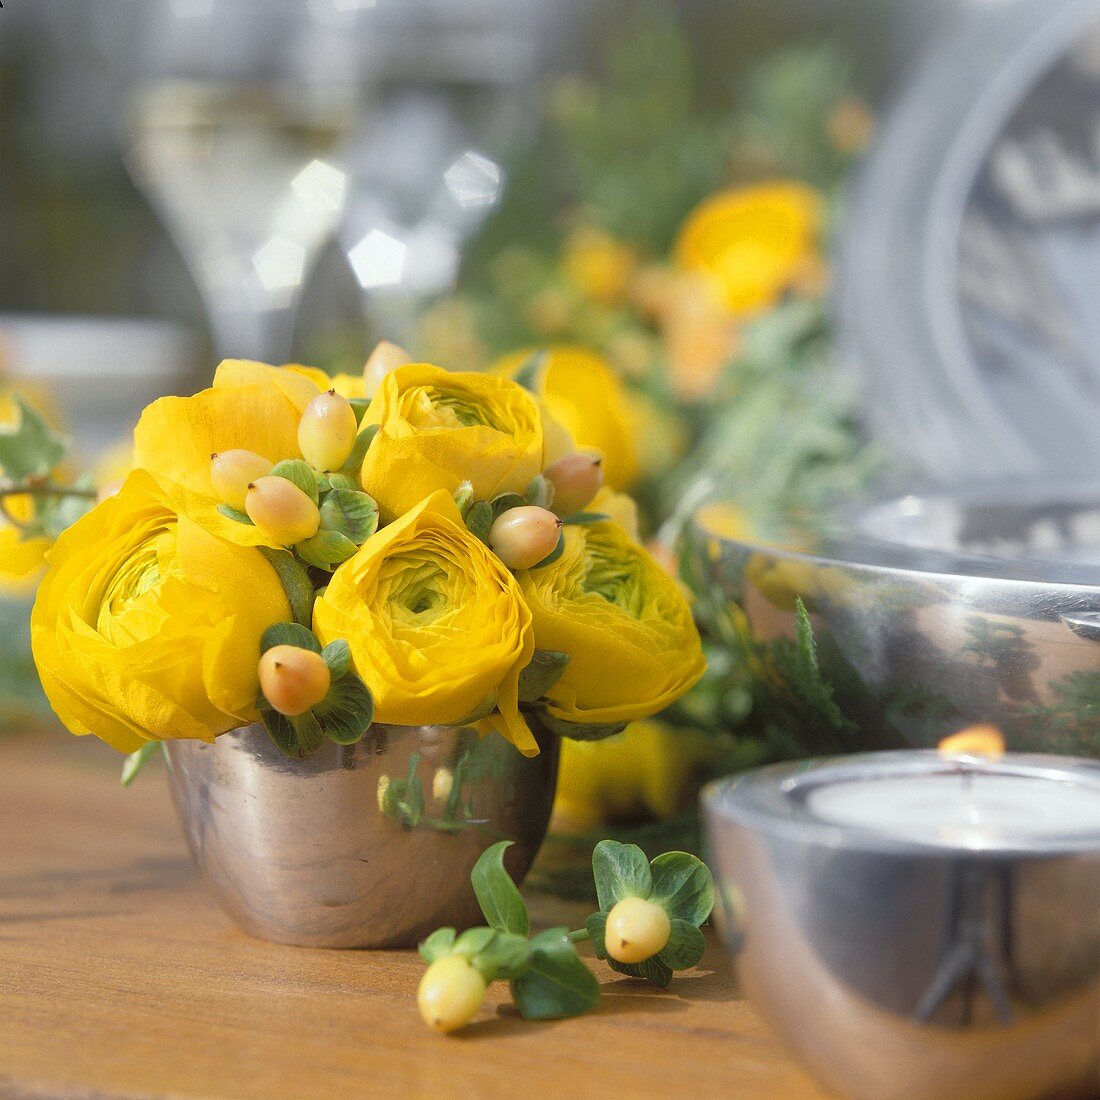 Yellow flowers in silver vase as table decoration